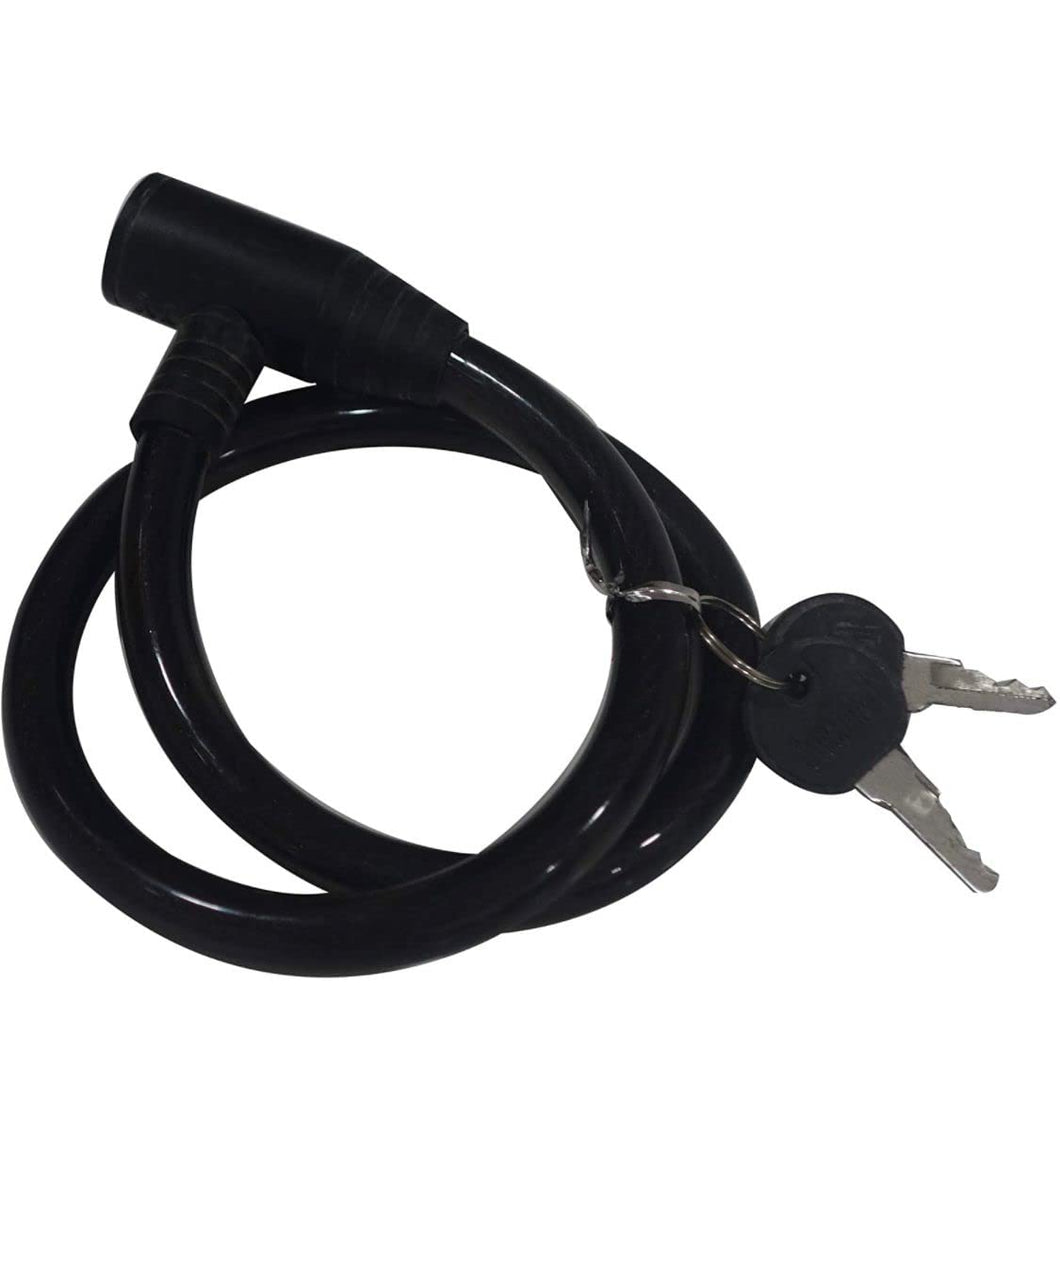 Anti-Theft Flexible Cable Lock with 2 Keys - Random Colors